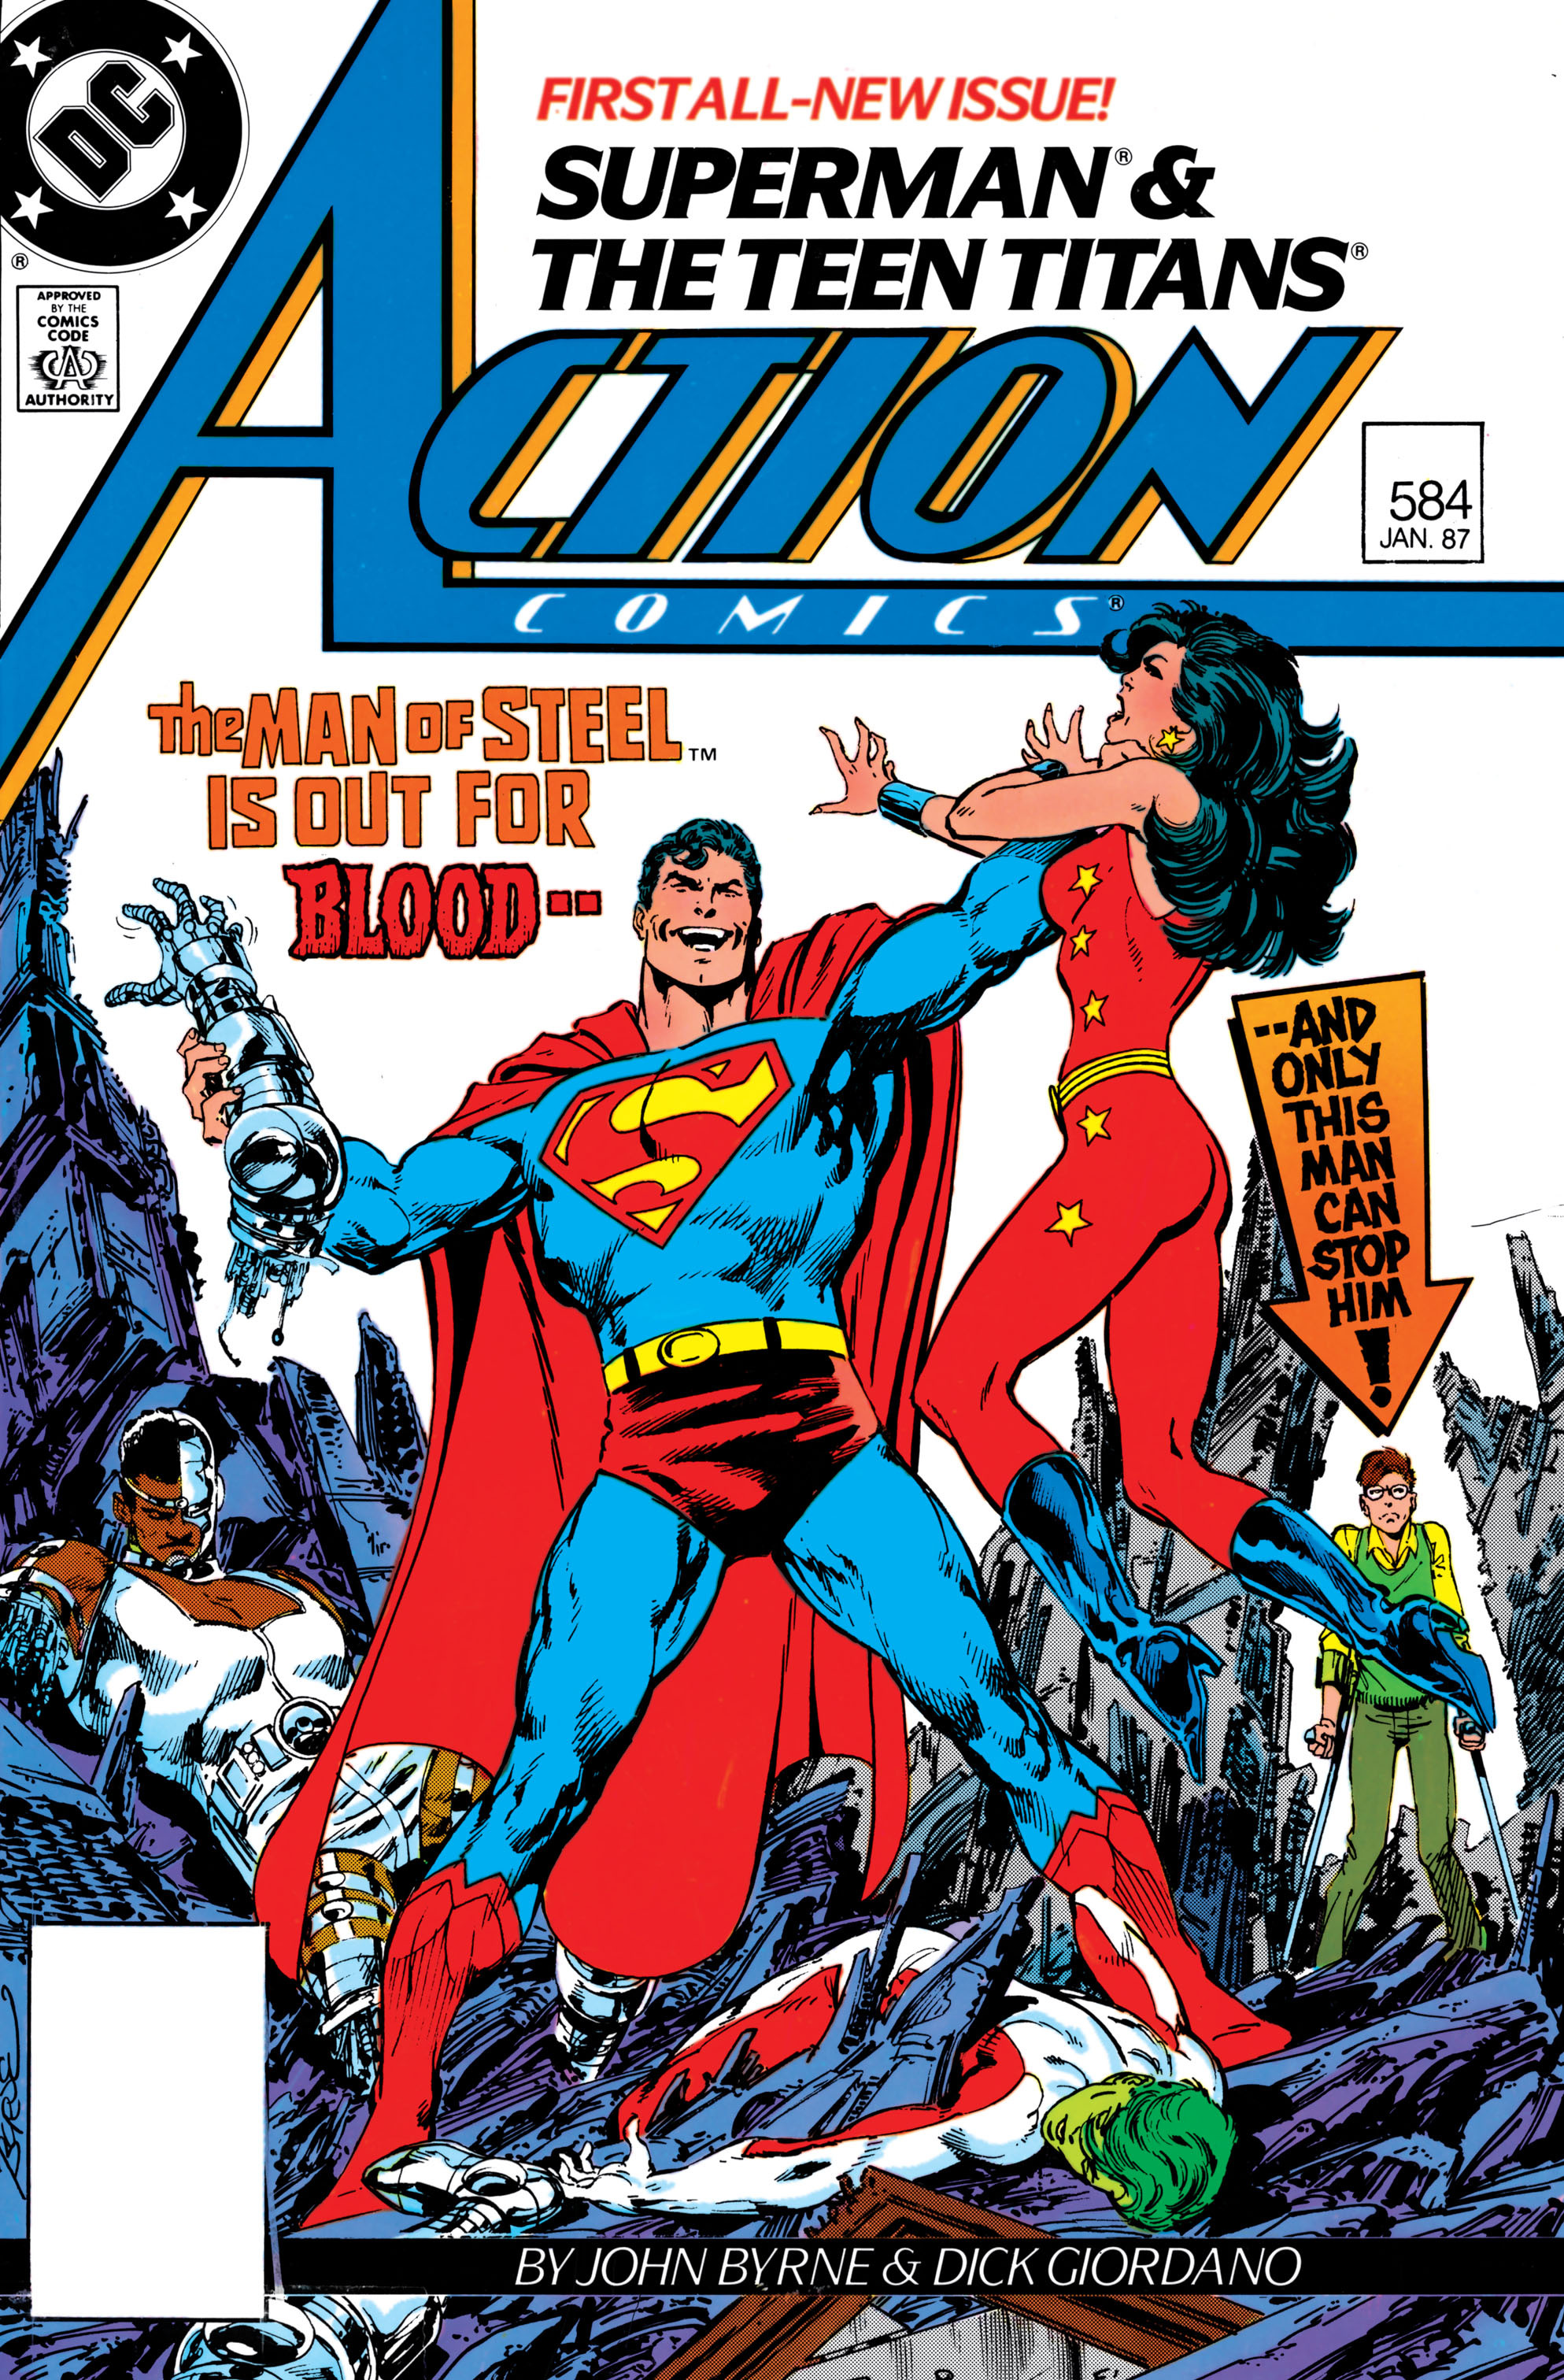 Read online Superman (2011) comic -  Issue # _Special - Superman 201 - 16